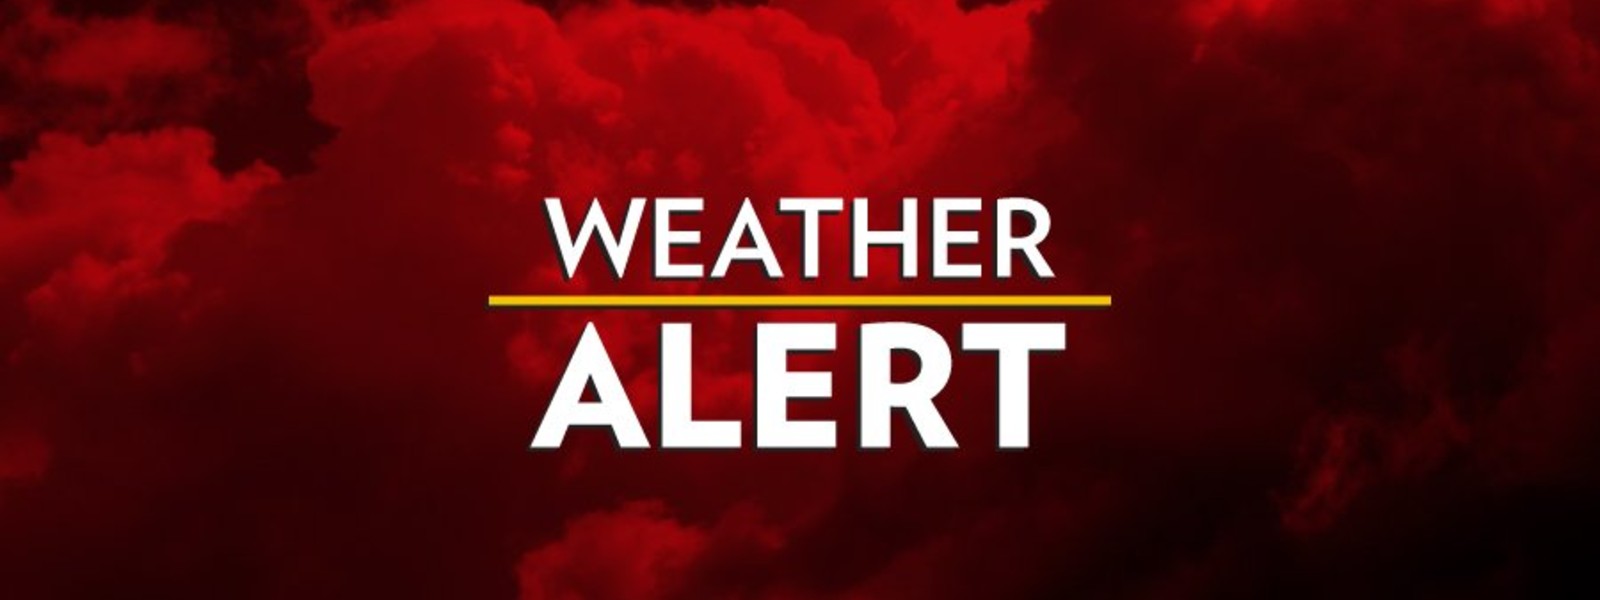 Amber alert issued for strong winds and rough seas